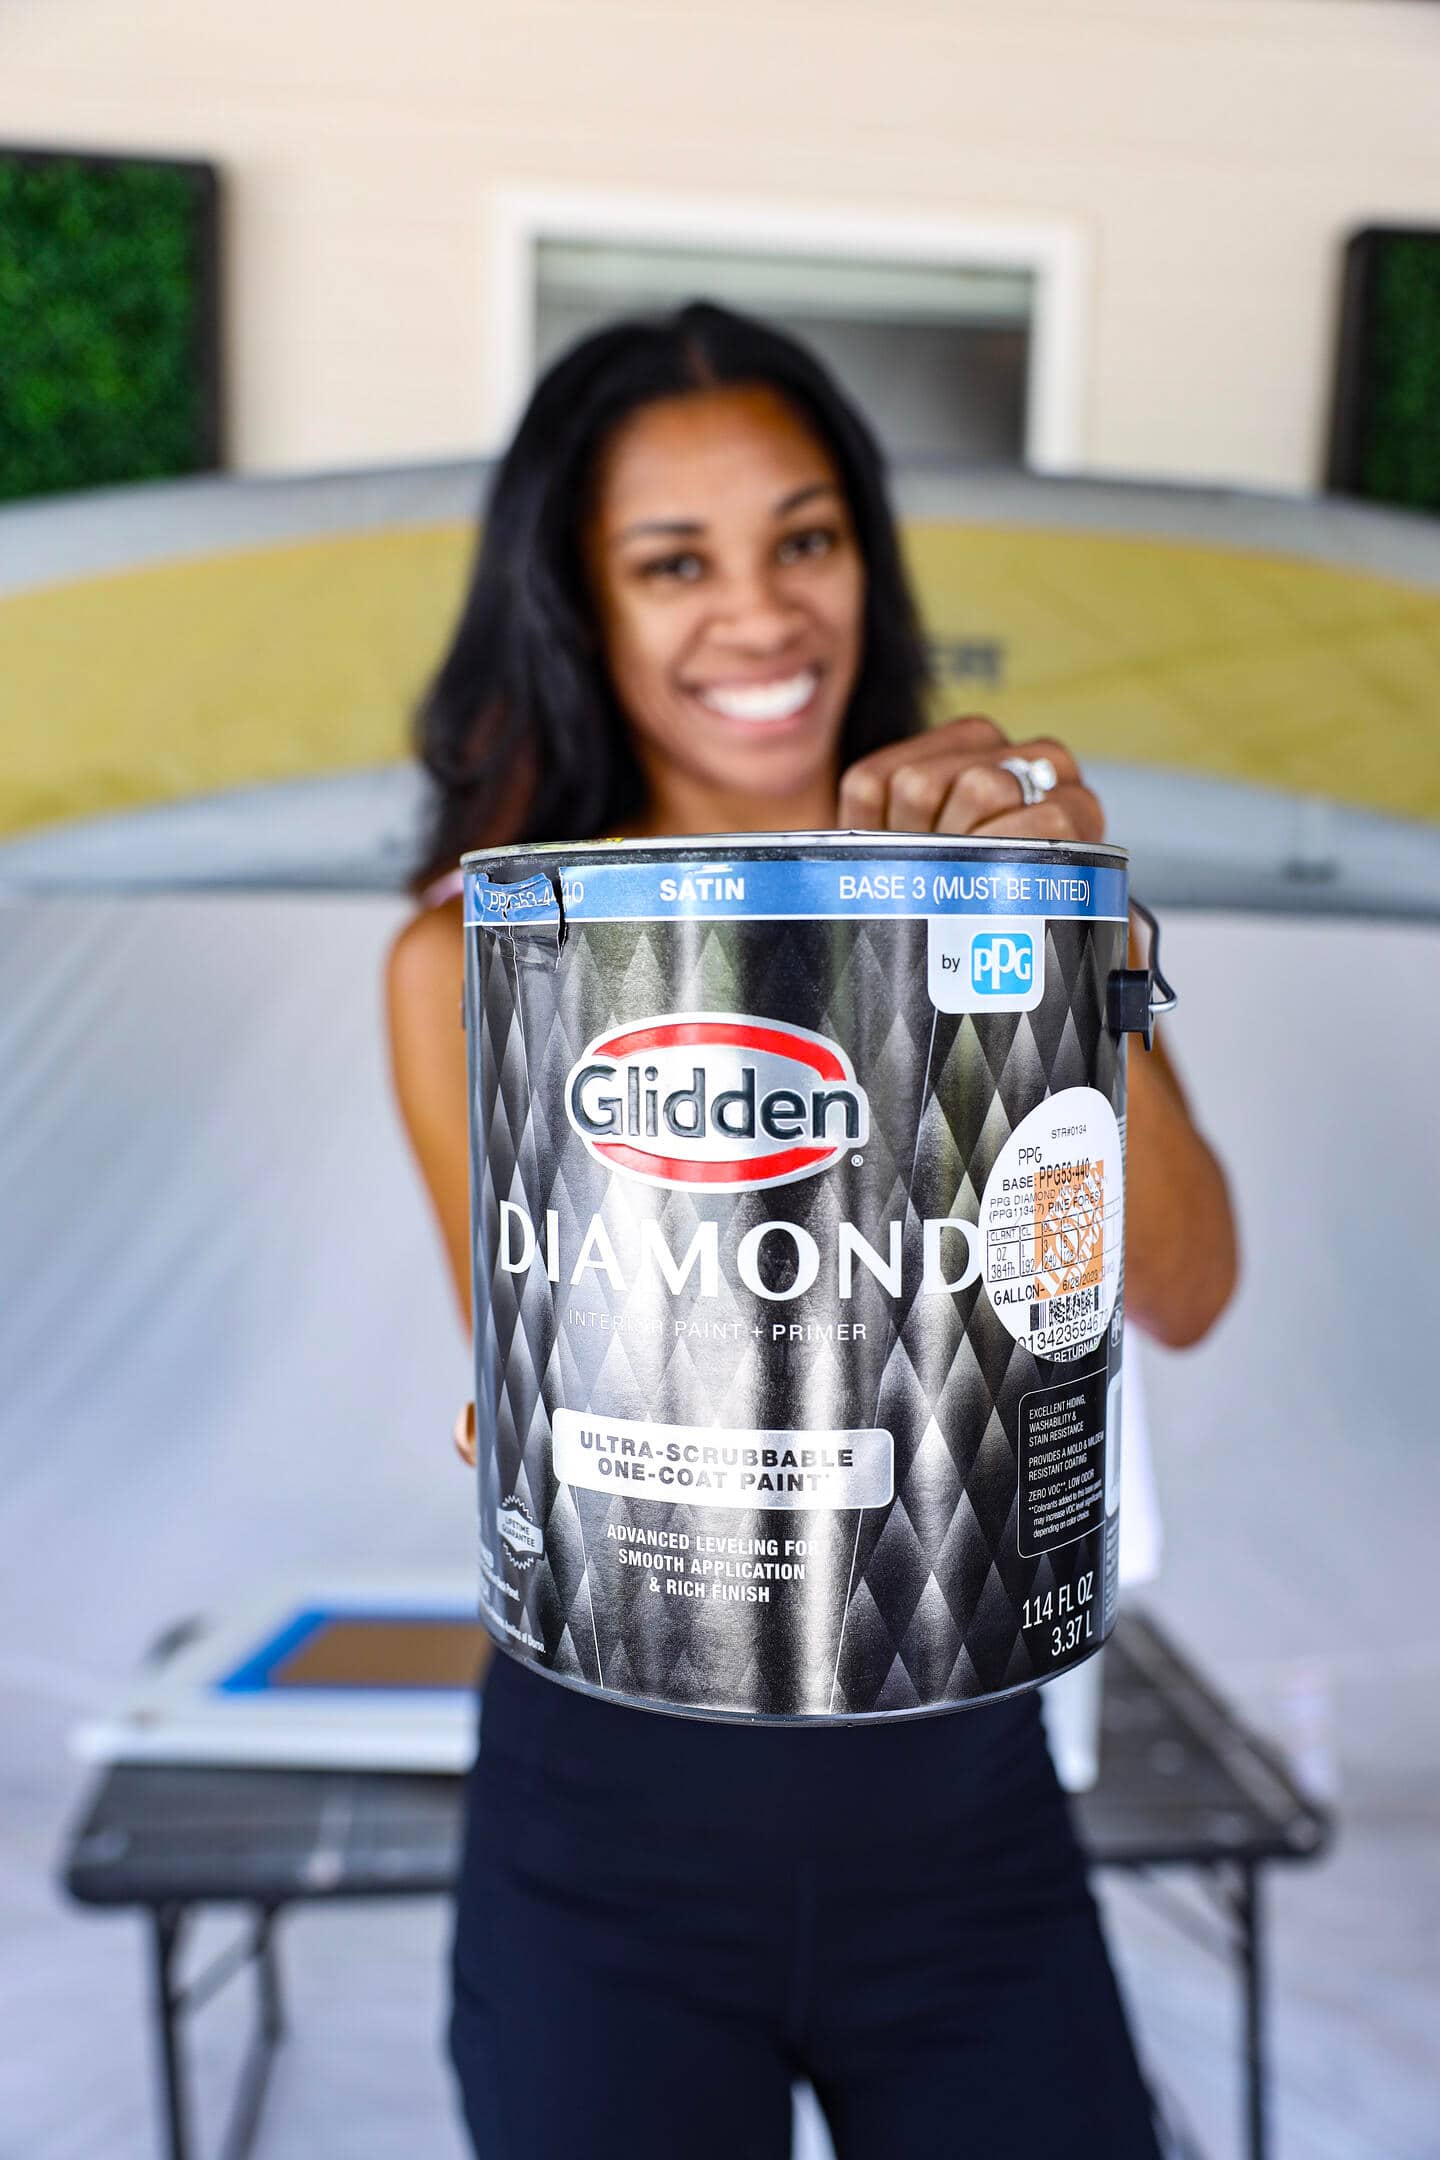 Focused shot of a woman holding a can of Glidden Diamond paint